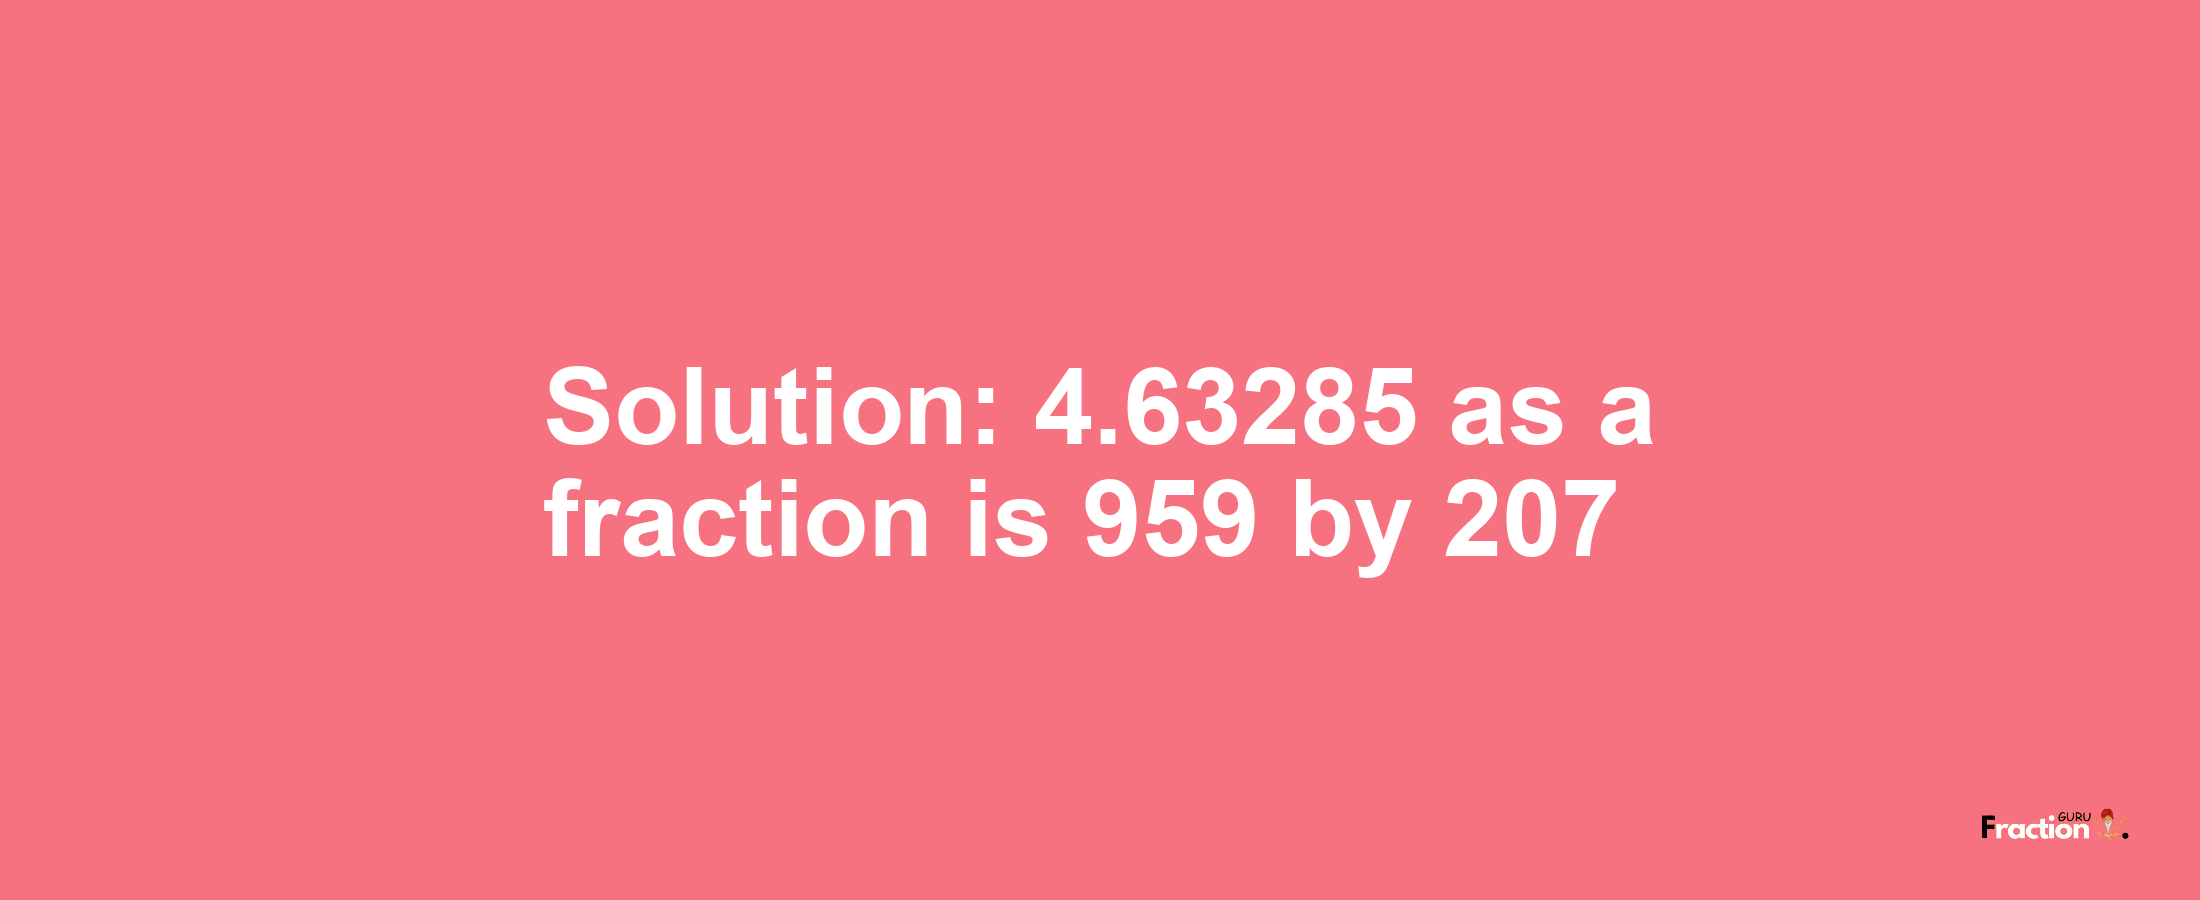 Solution:4.63285 as a fraction is 959/207